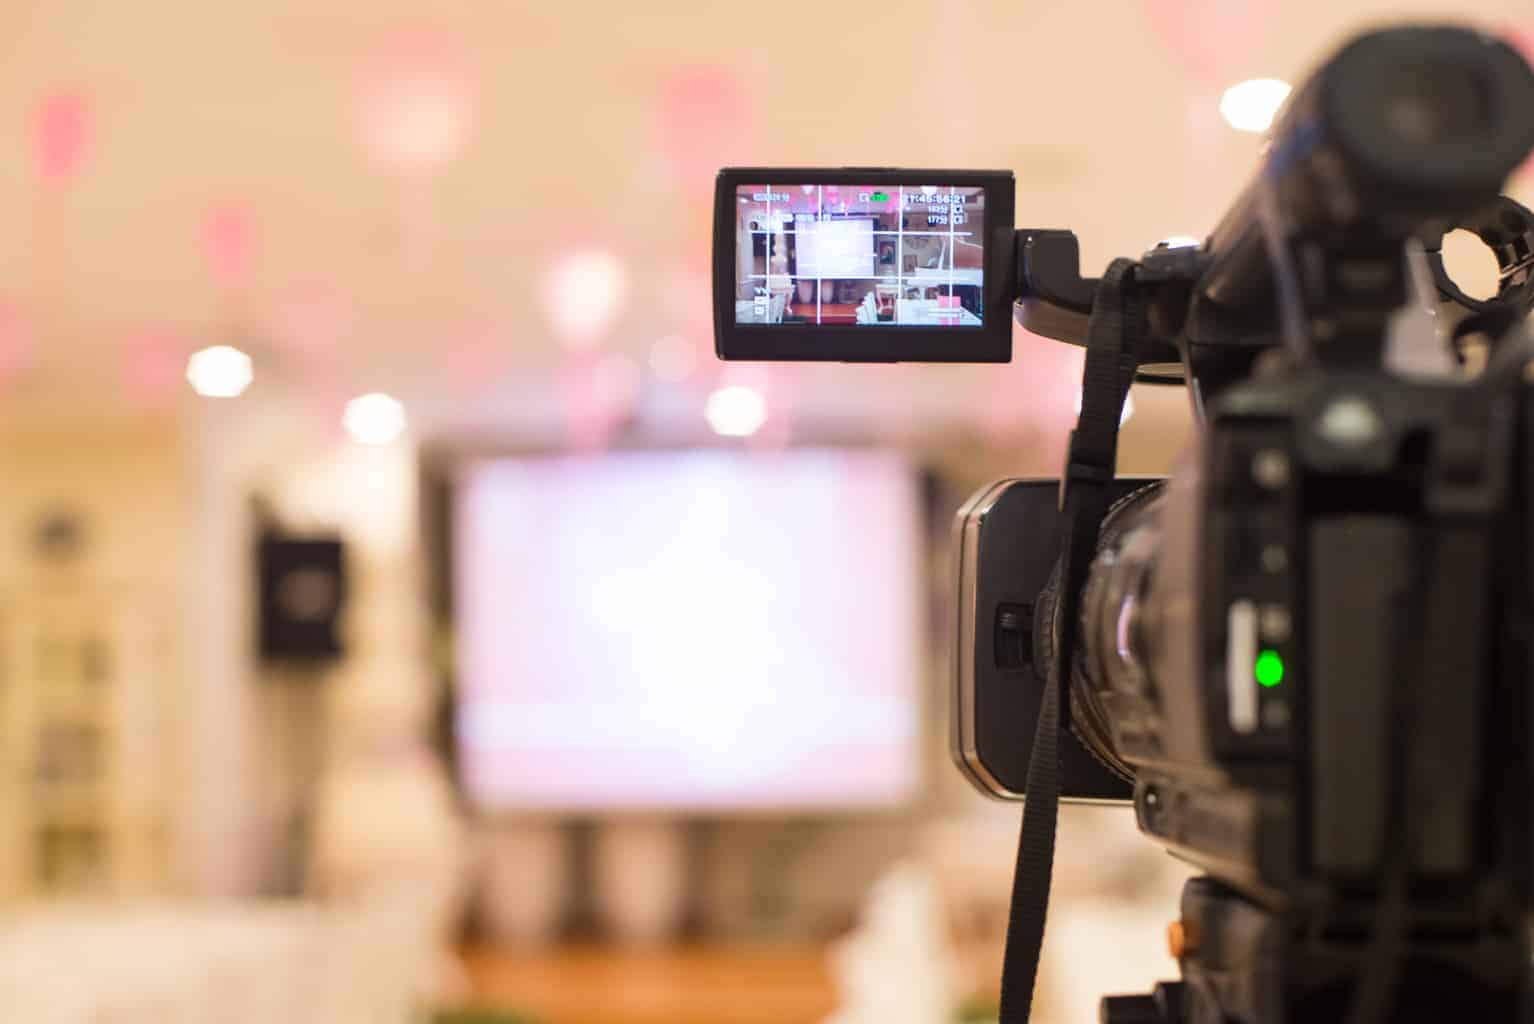 7 Real Estate Video Ideas for Getting More Leads Online